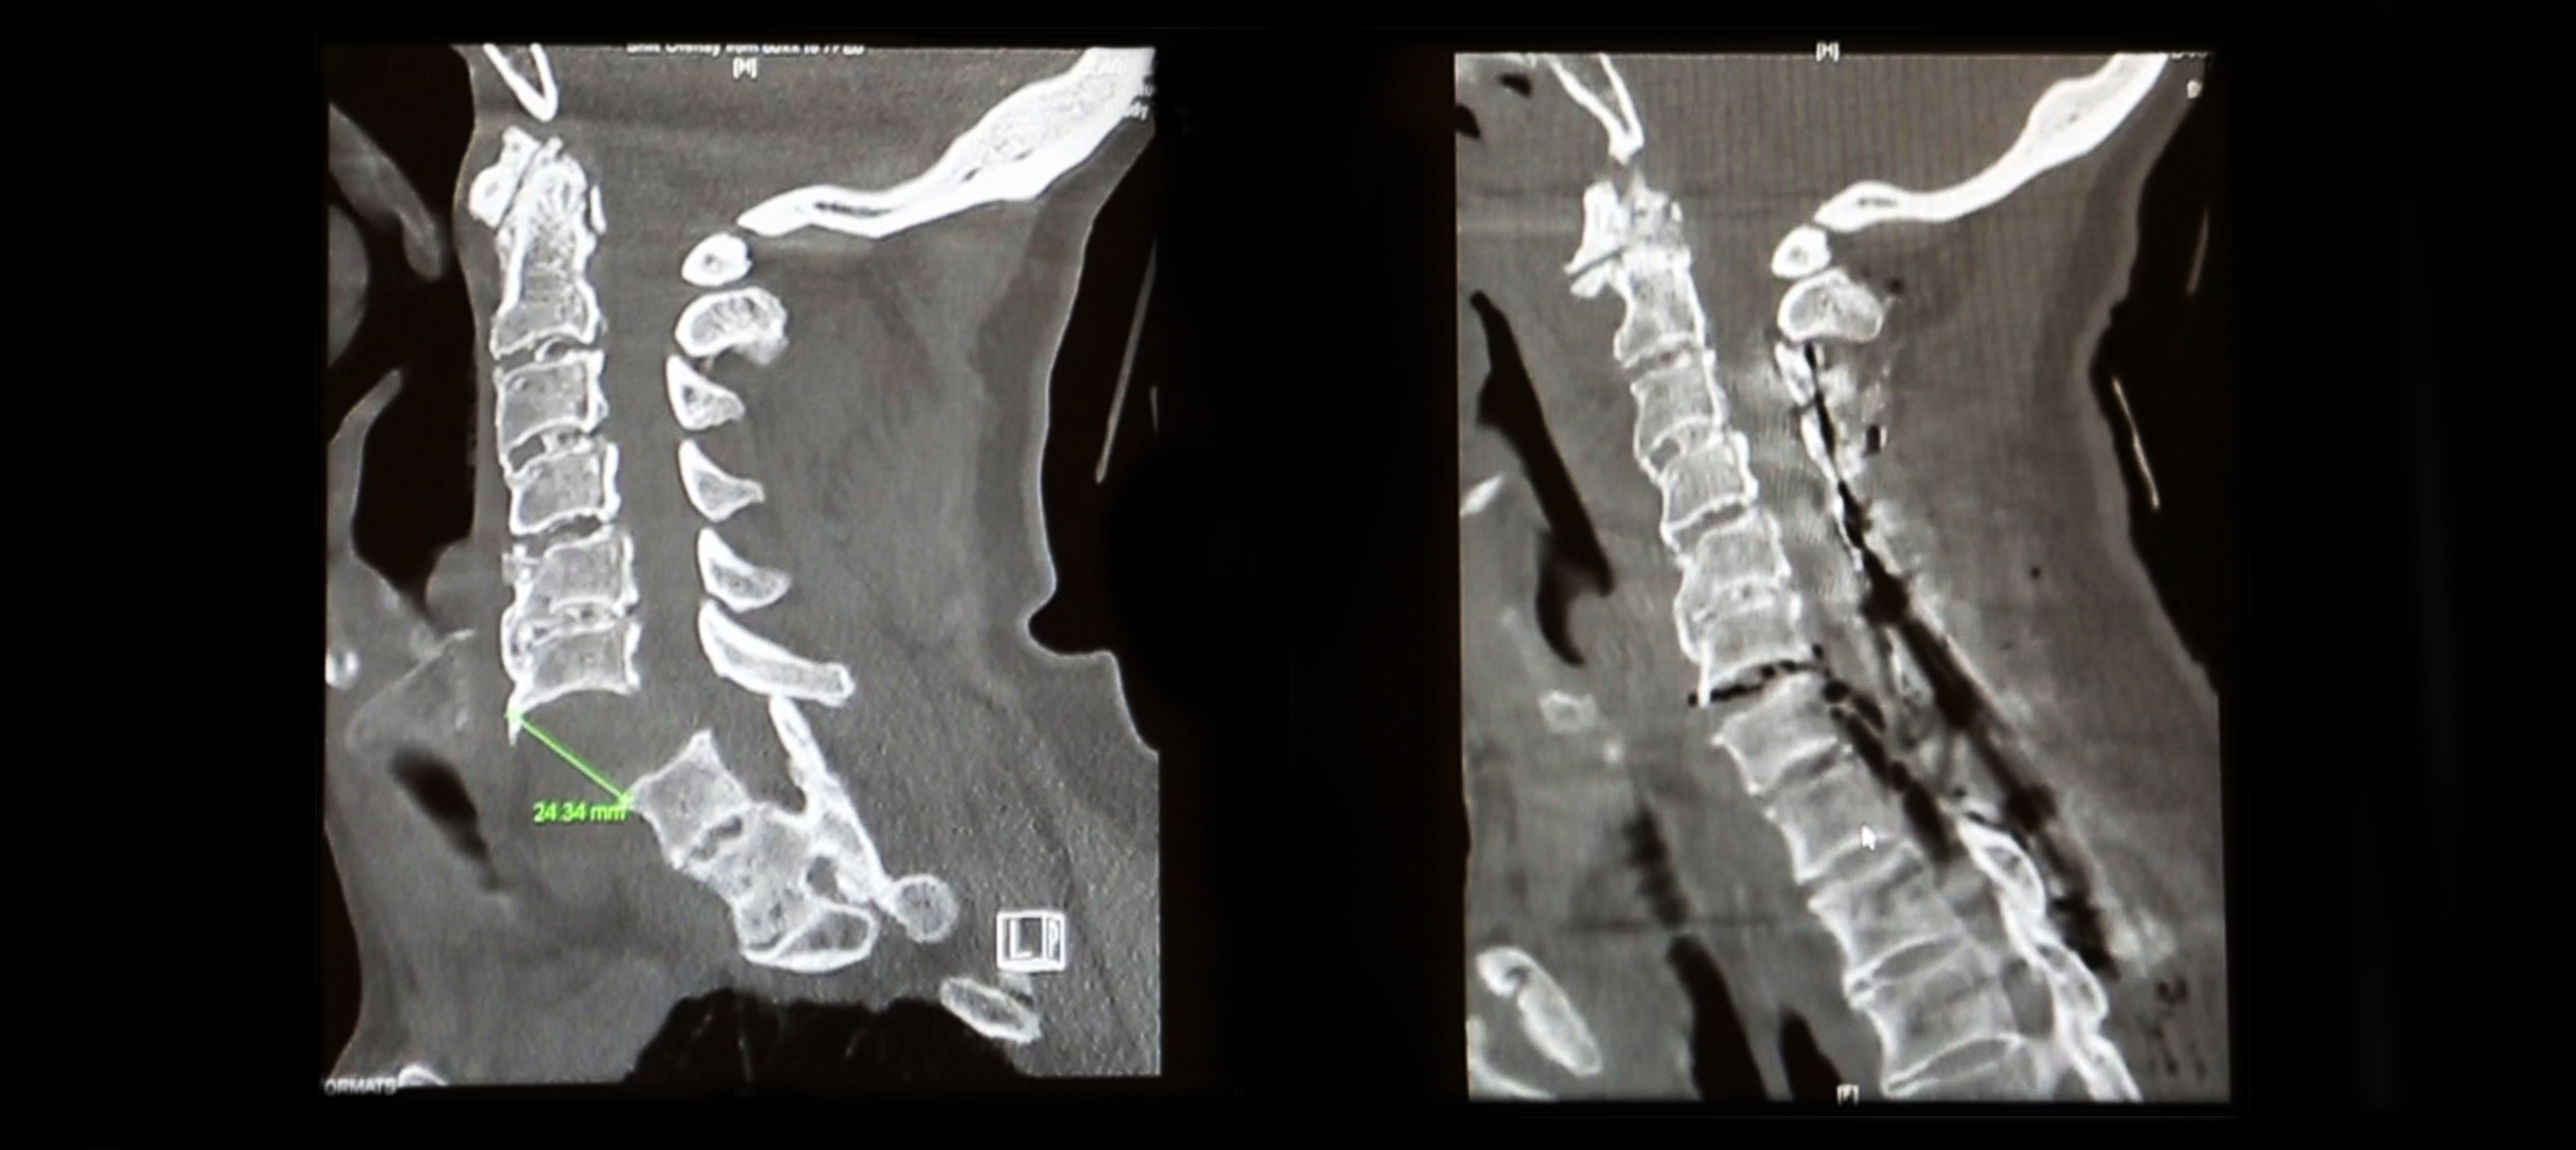 James Clark's spinal column before and after surgery to repair the severed portion